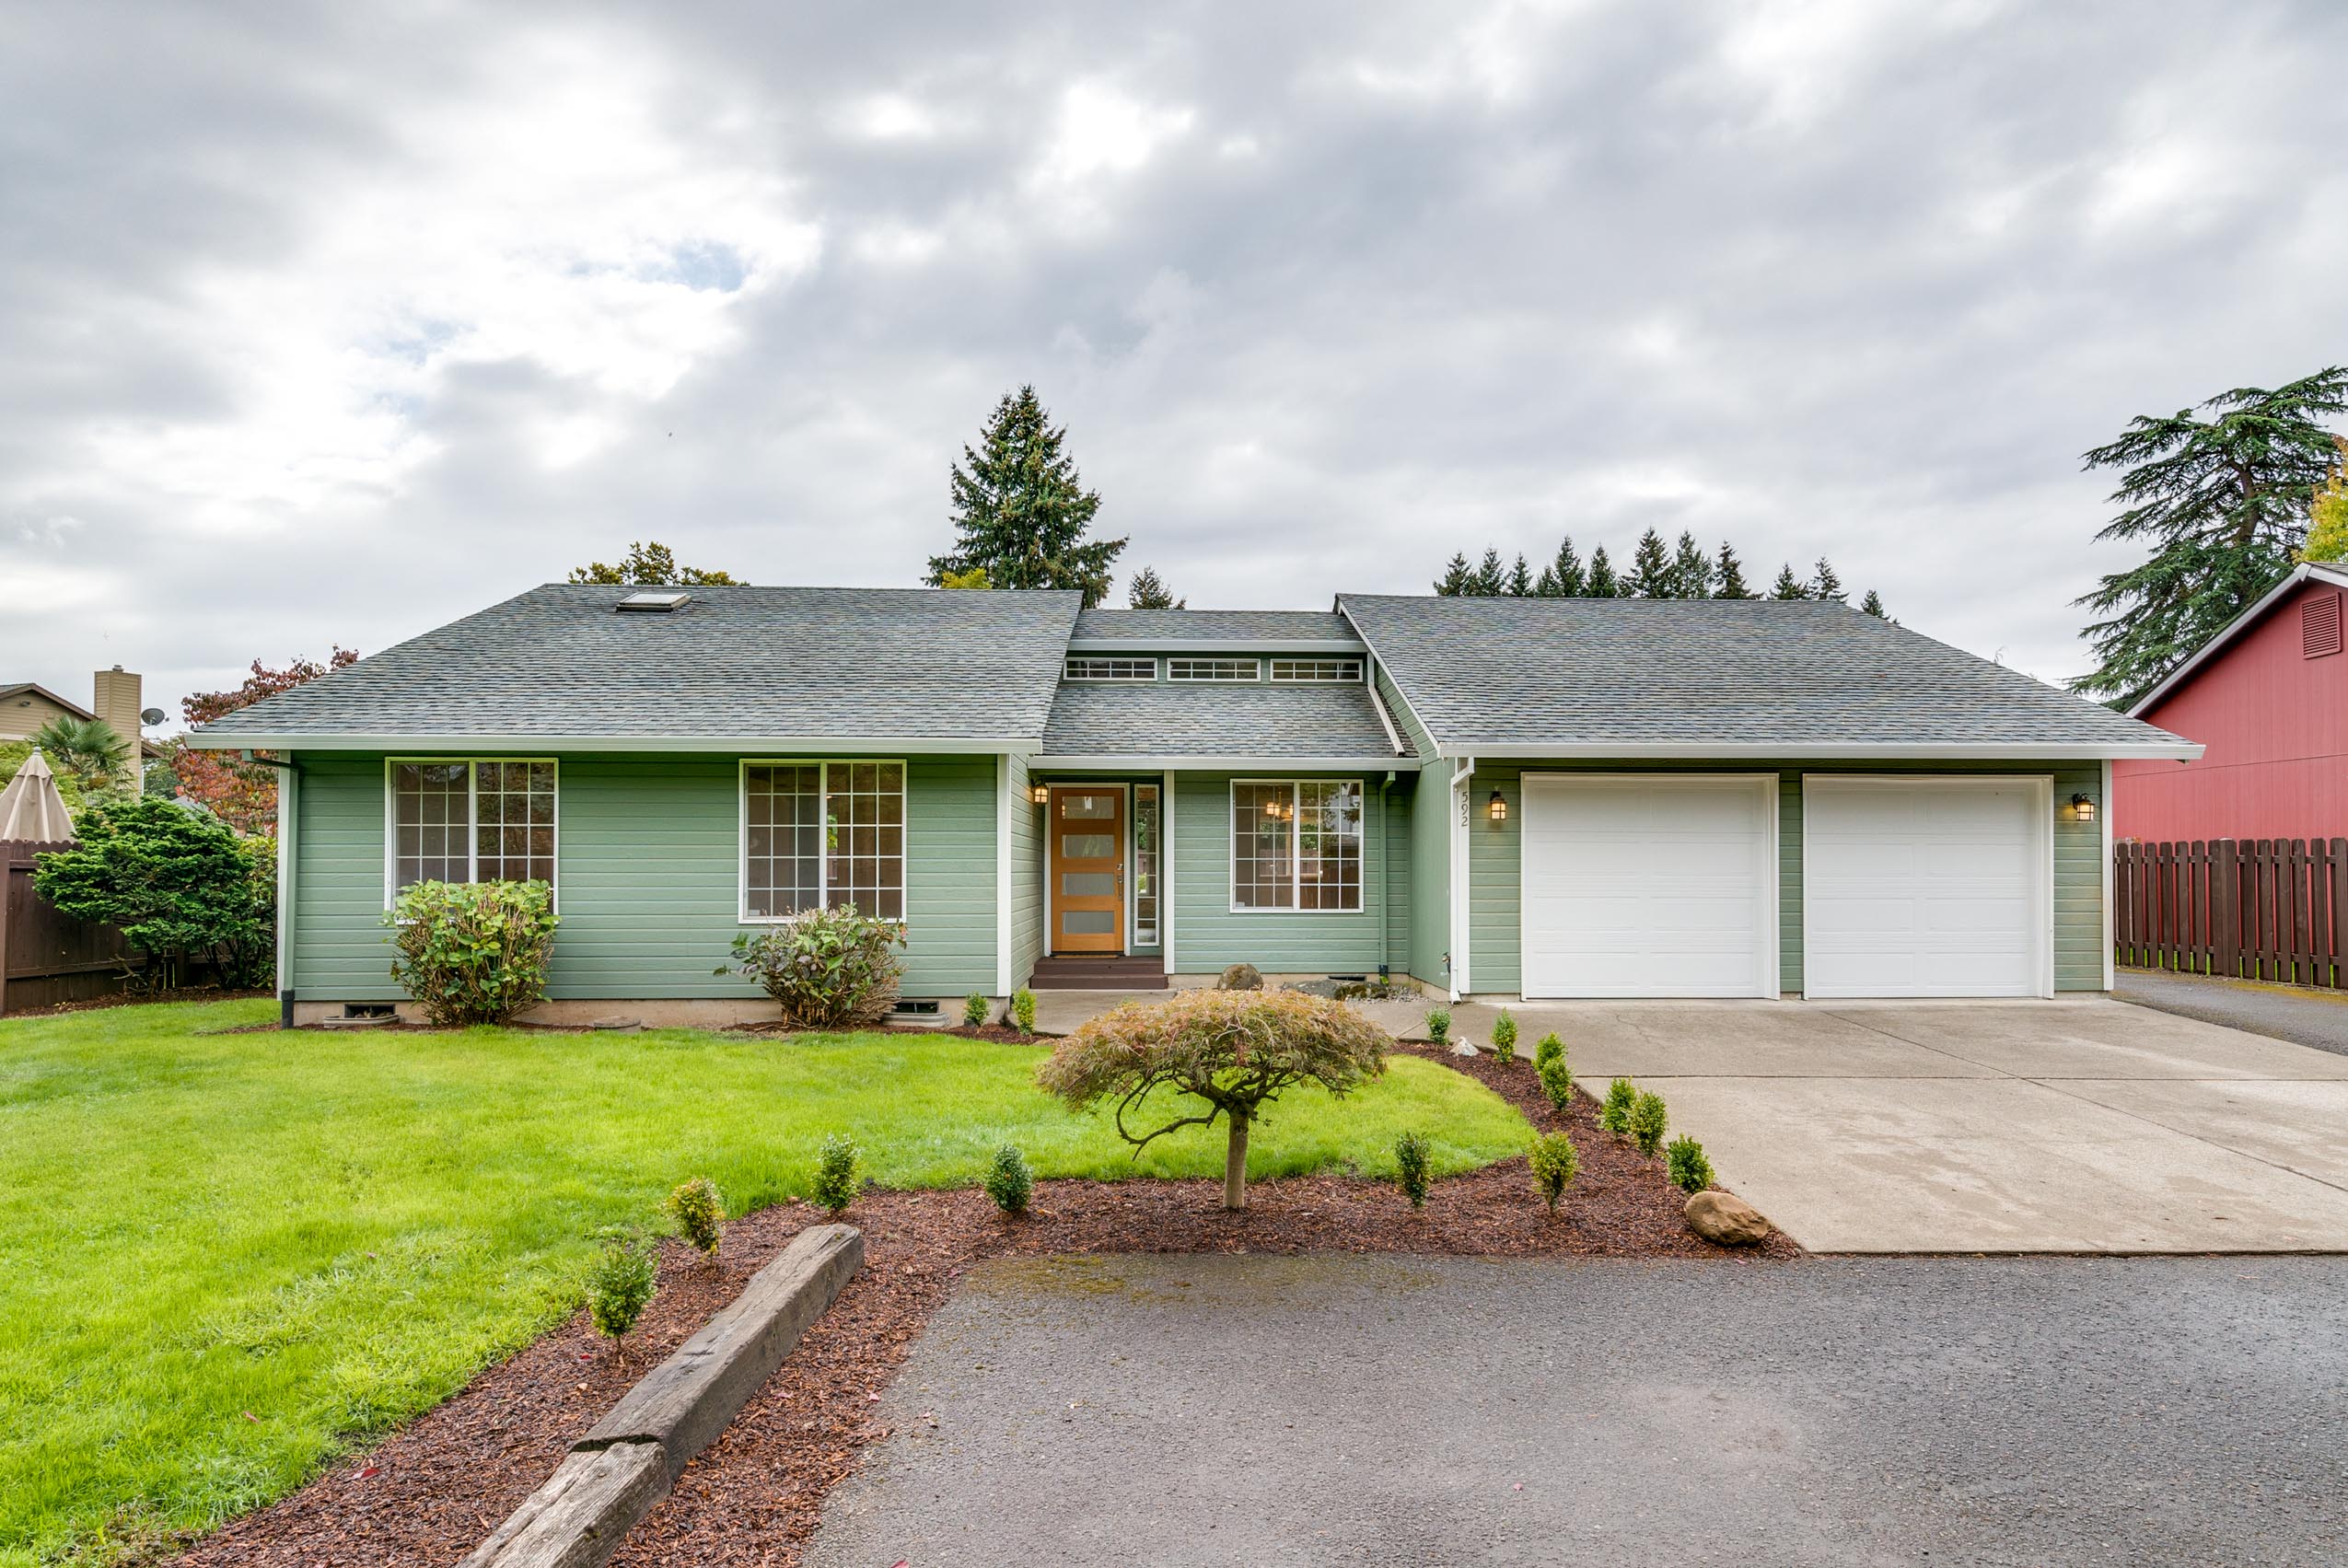 Just Sold! Fantastically Updated Ranch Home In The Heart Of Canby!